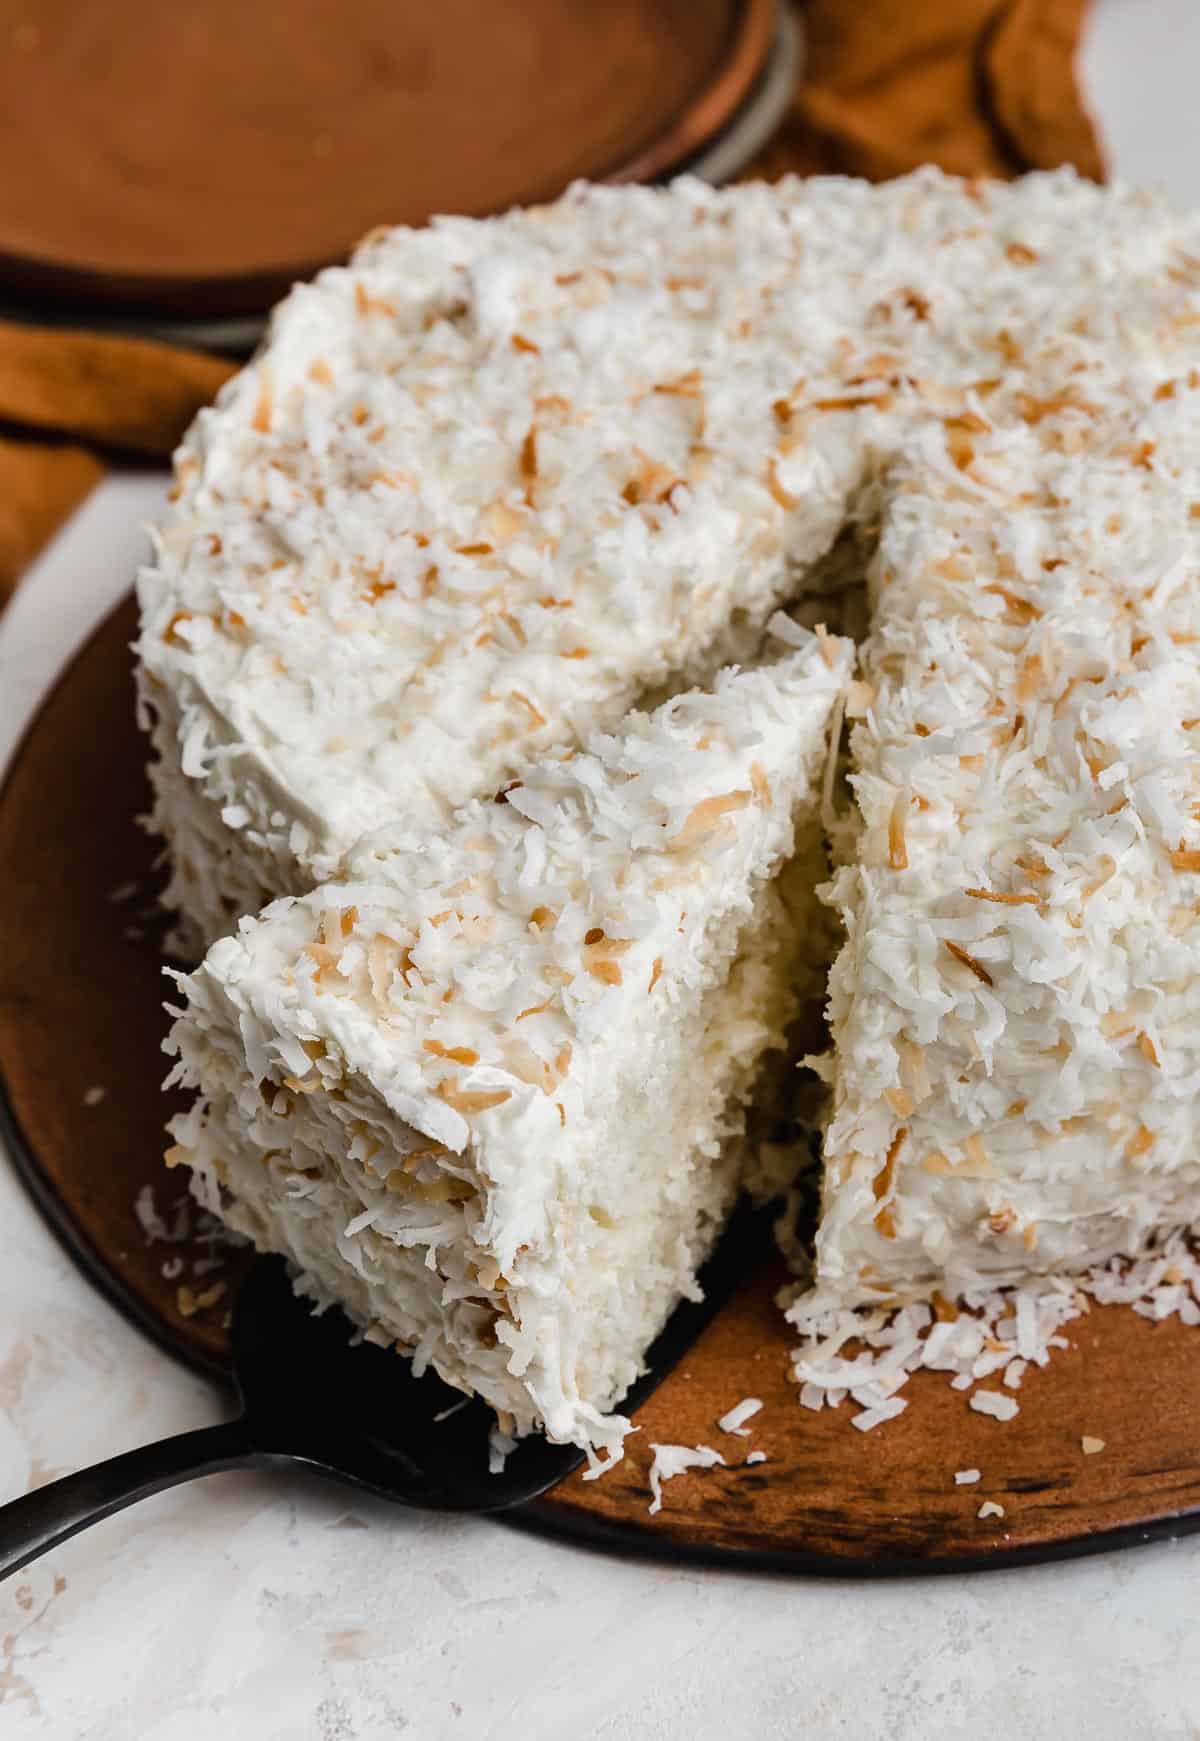 A double layer Coconut Cake Recipe made from a cake box mix with toasted and sweetened shredded coconut sprinkled over the full cake.